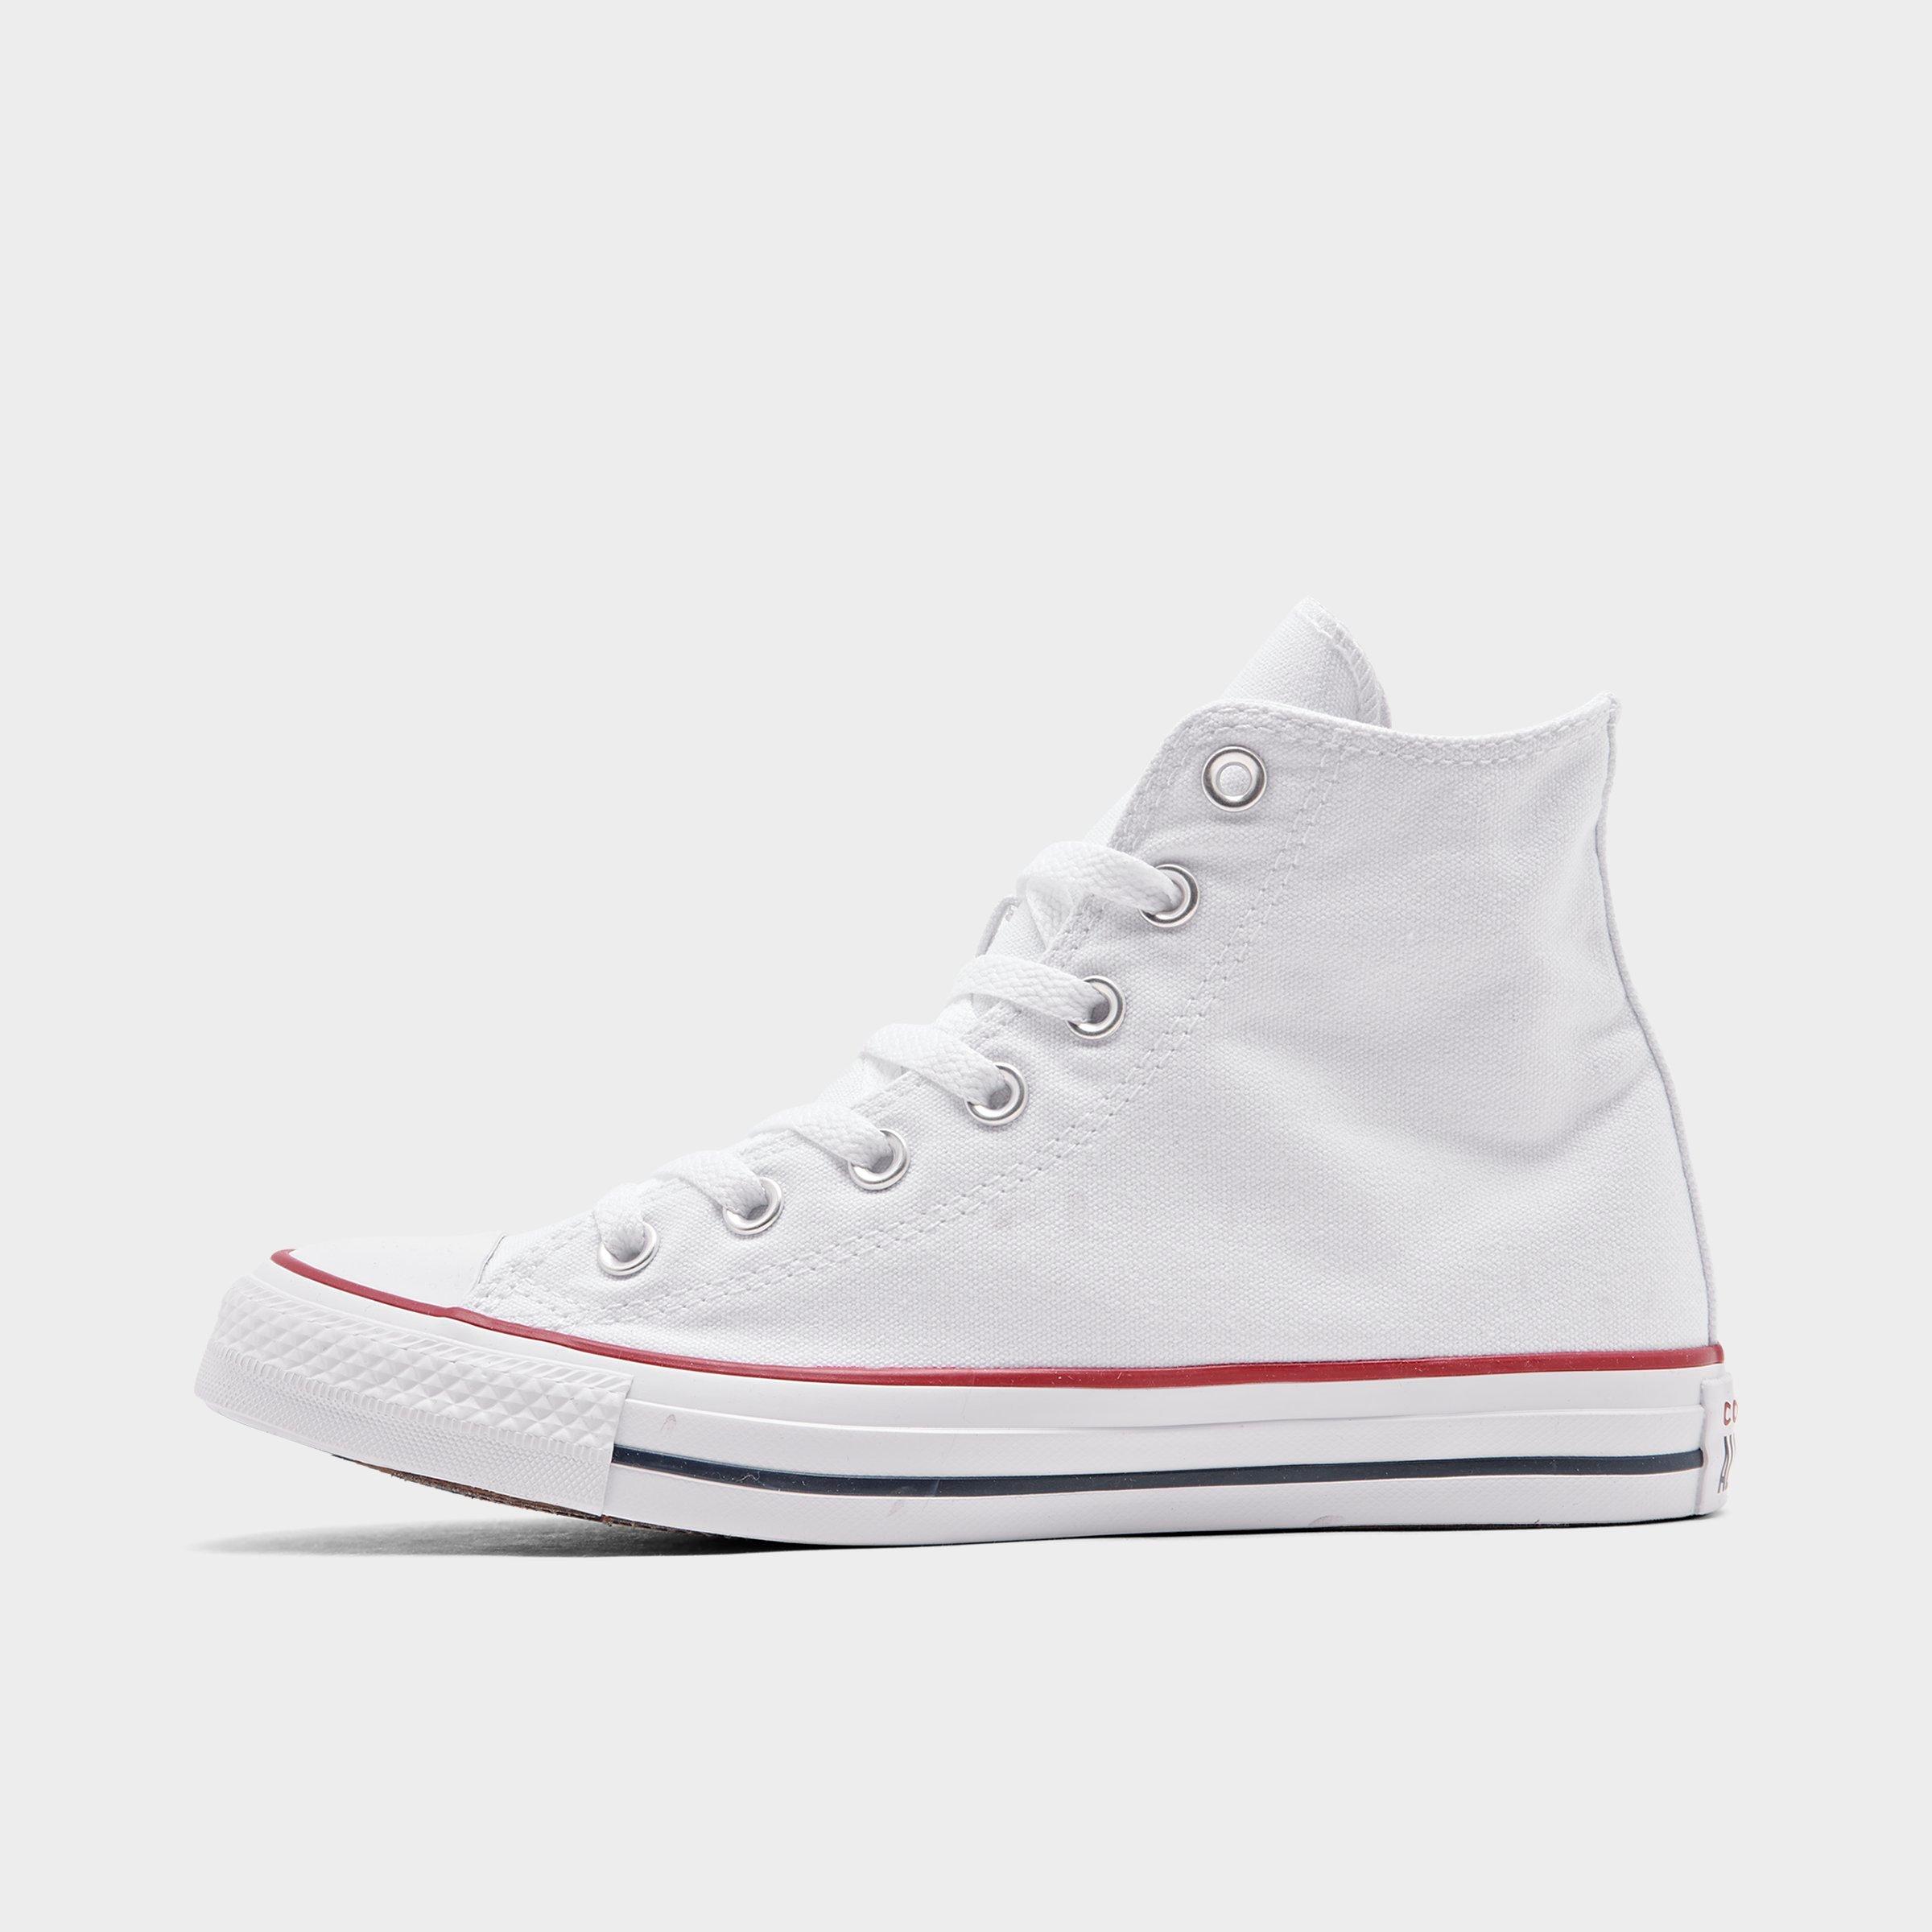 UPC 022867416626 product image for Converse Women's Chuck Taylor All Star High Top Casual Shoes (Big Kids' Sizes Av | upcitemdb.com